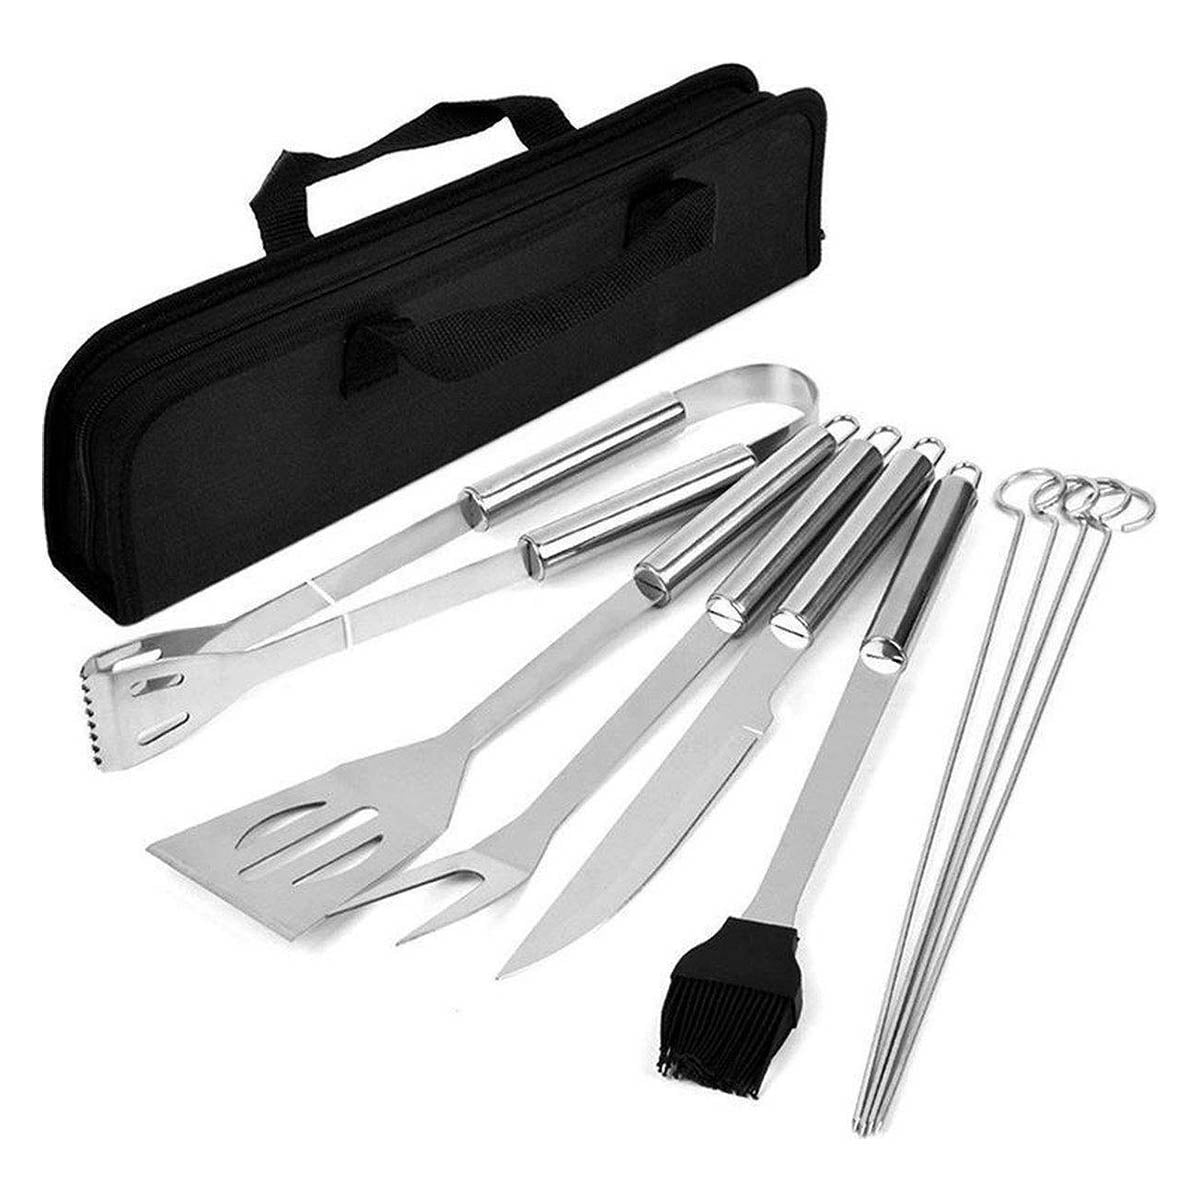 <tc>Ariko</tc> barbecue utensils and tongs set - 9-piece - BBQ - Tongs and skewers set - with storage bag